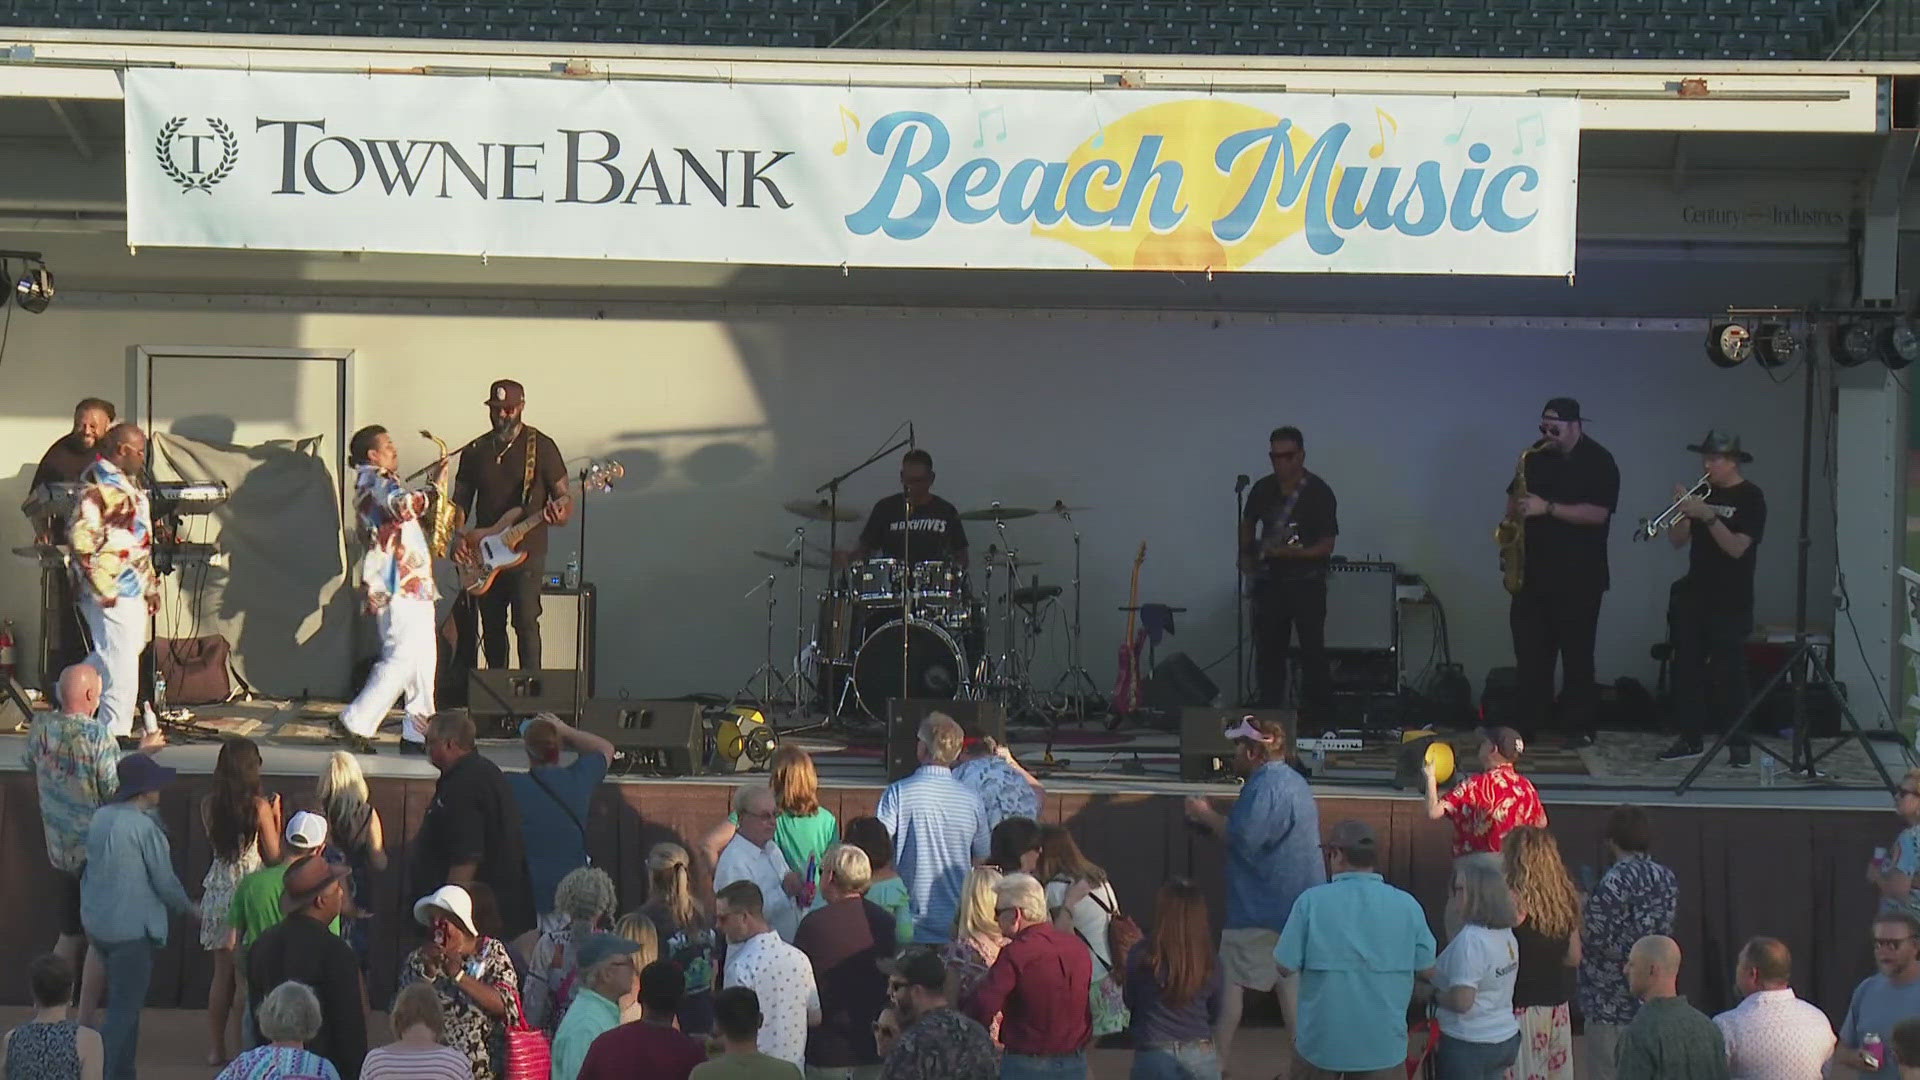 Thursday marked the first day of the season when a beach music band rocked the Hoppers’ stadium.